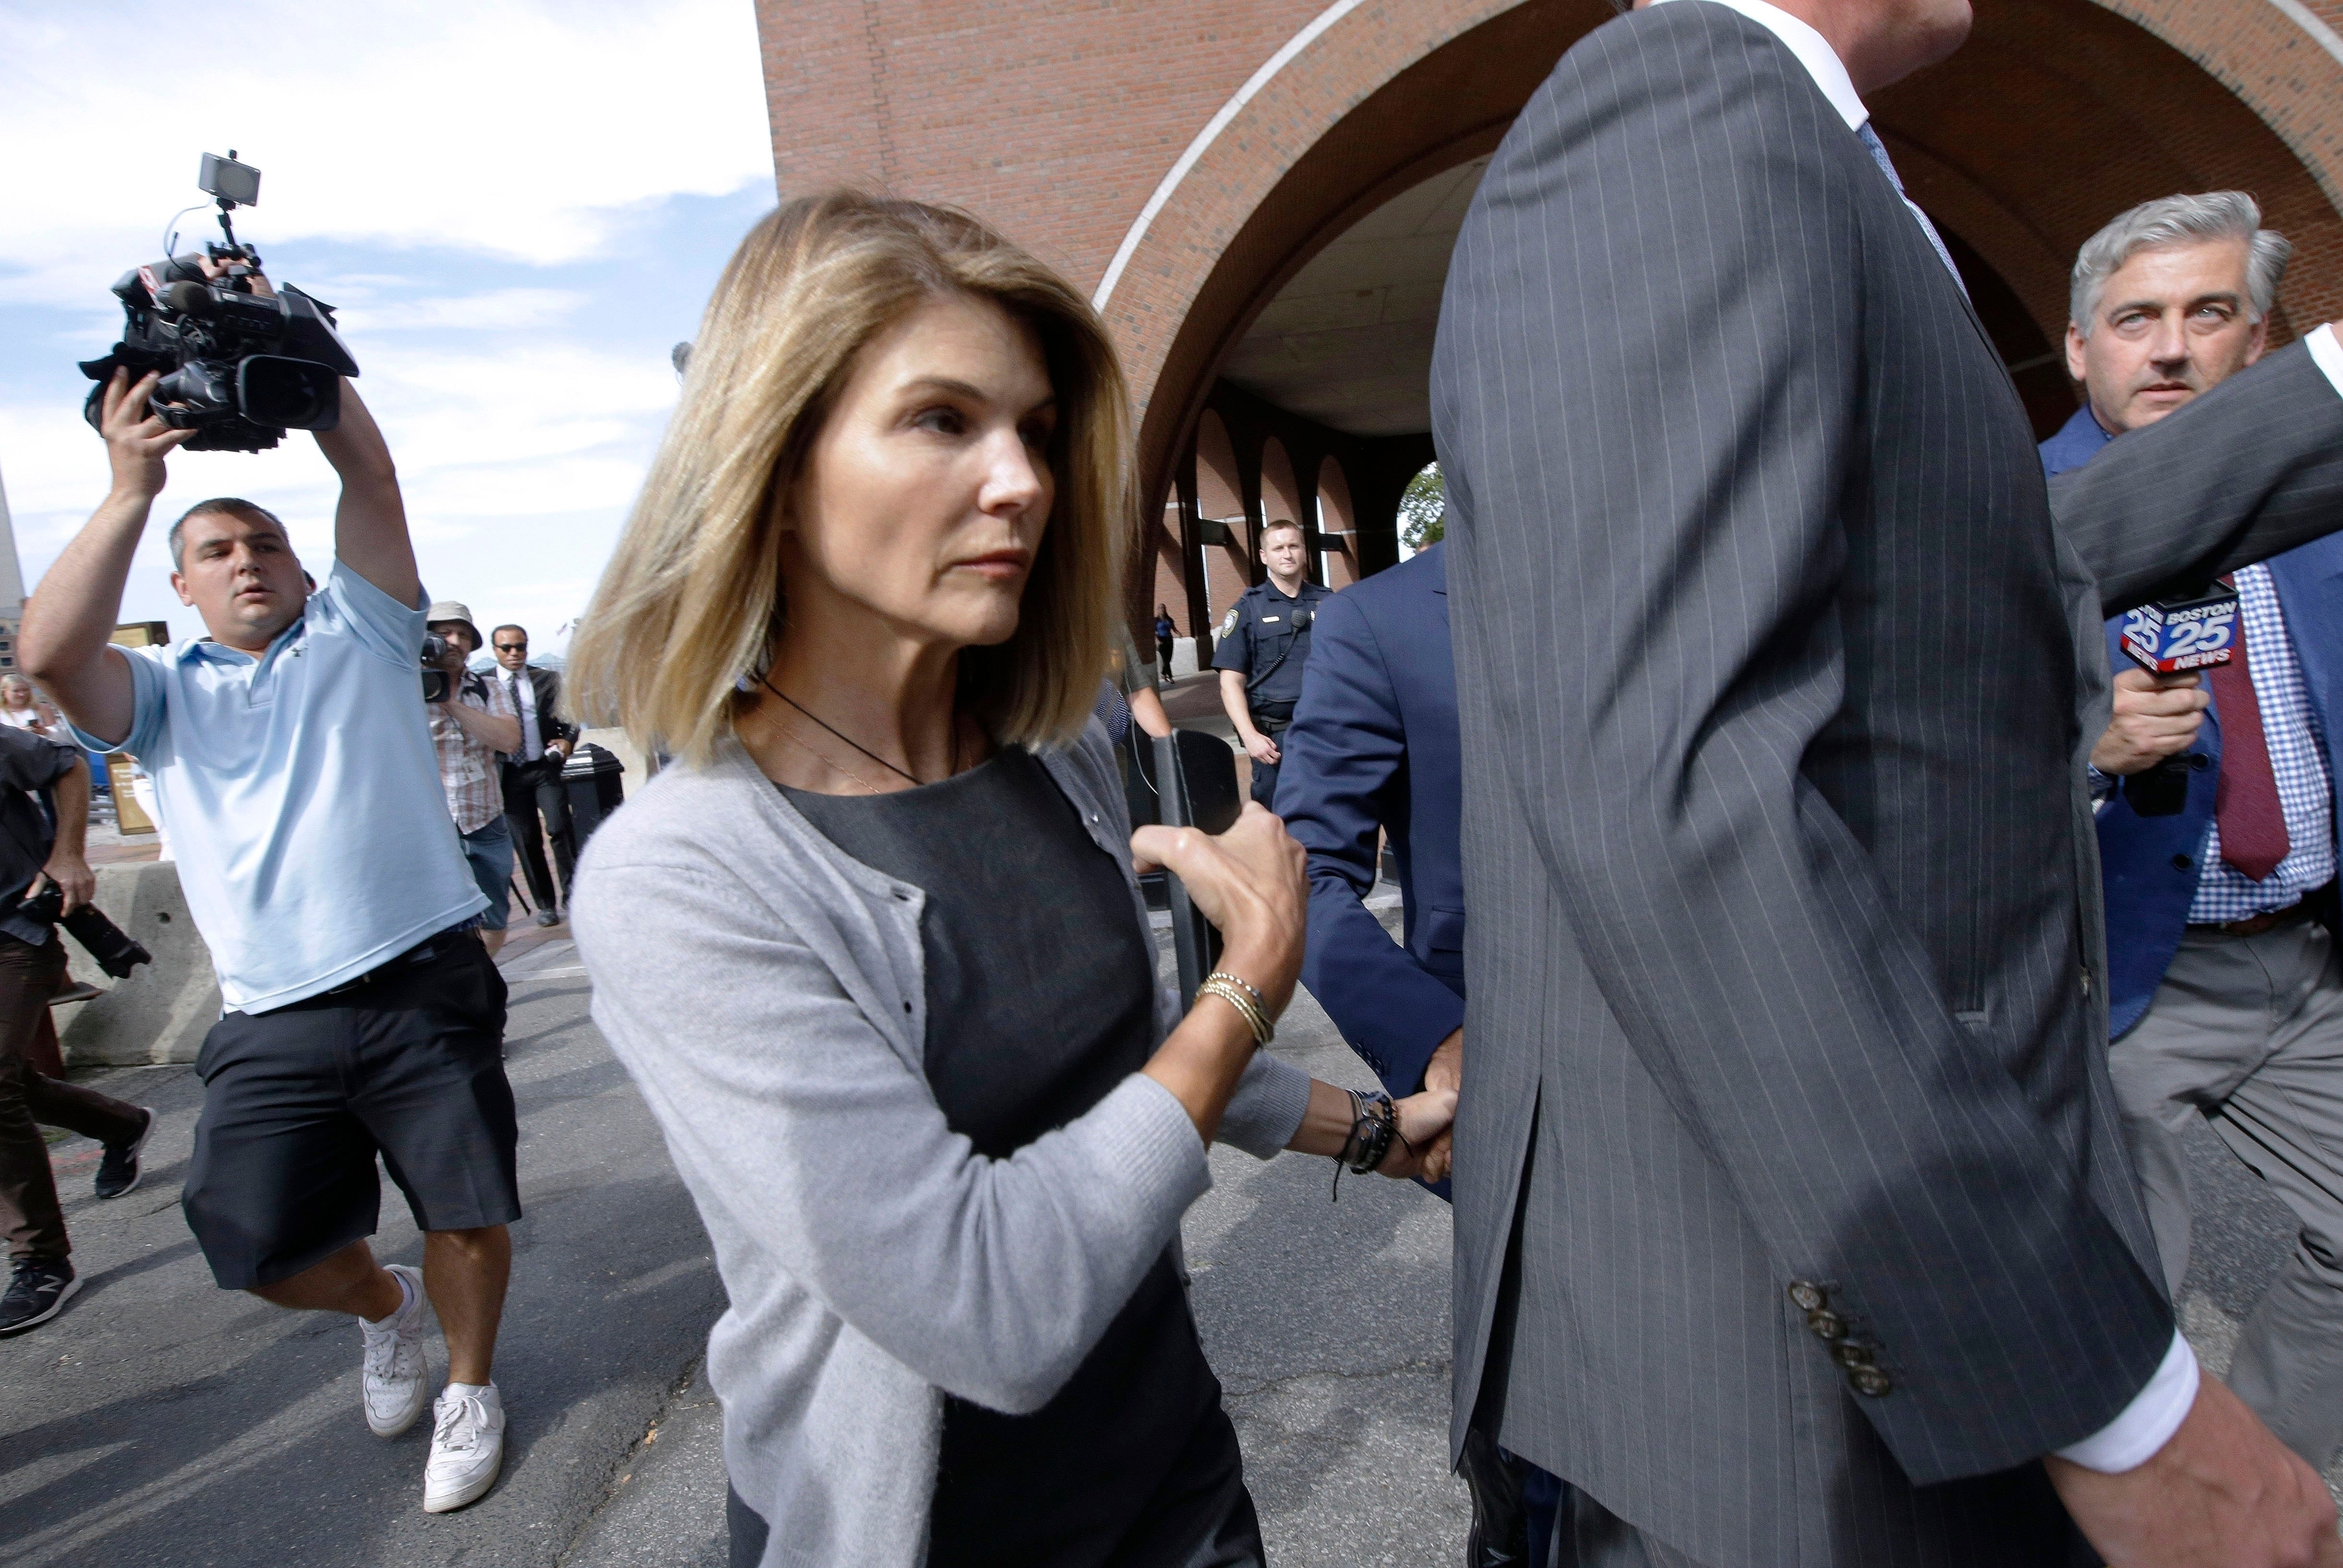 Lori Loughlin's attorneys say new evidence proves innocence in college admissions scandal - USA TODAY